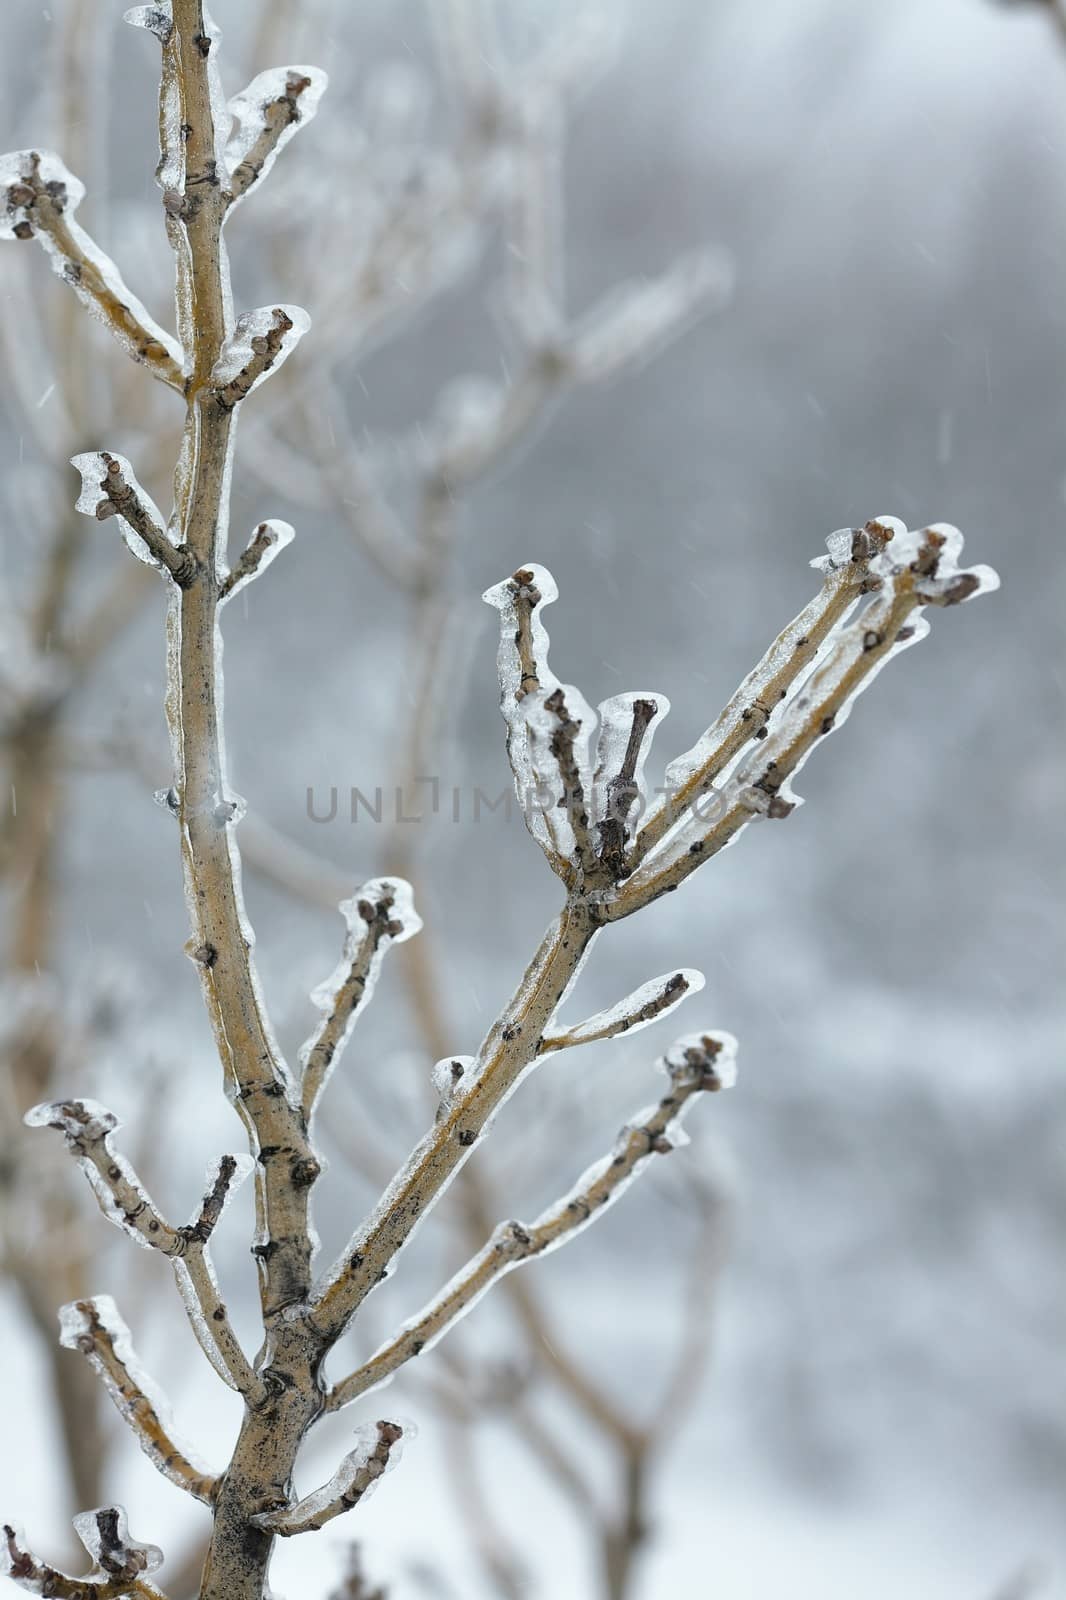 Frozen, Icy branches of a tree